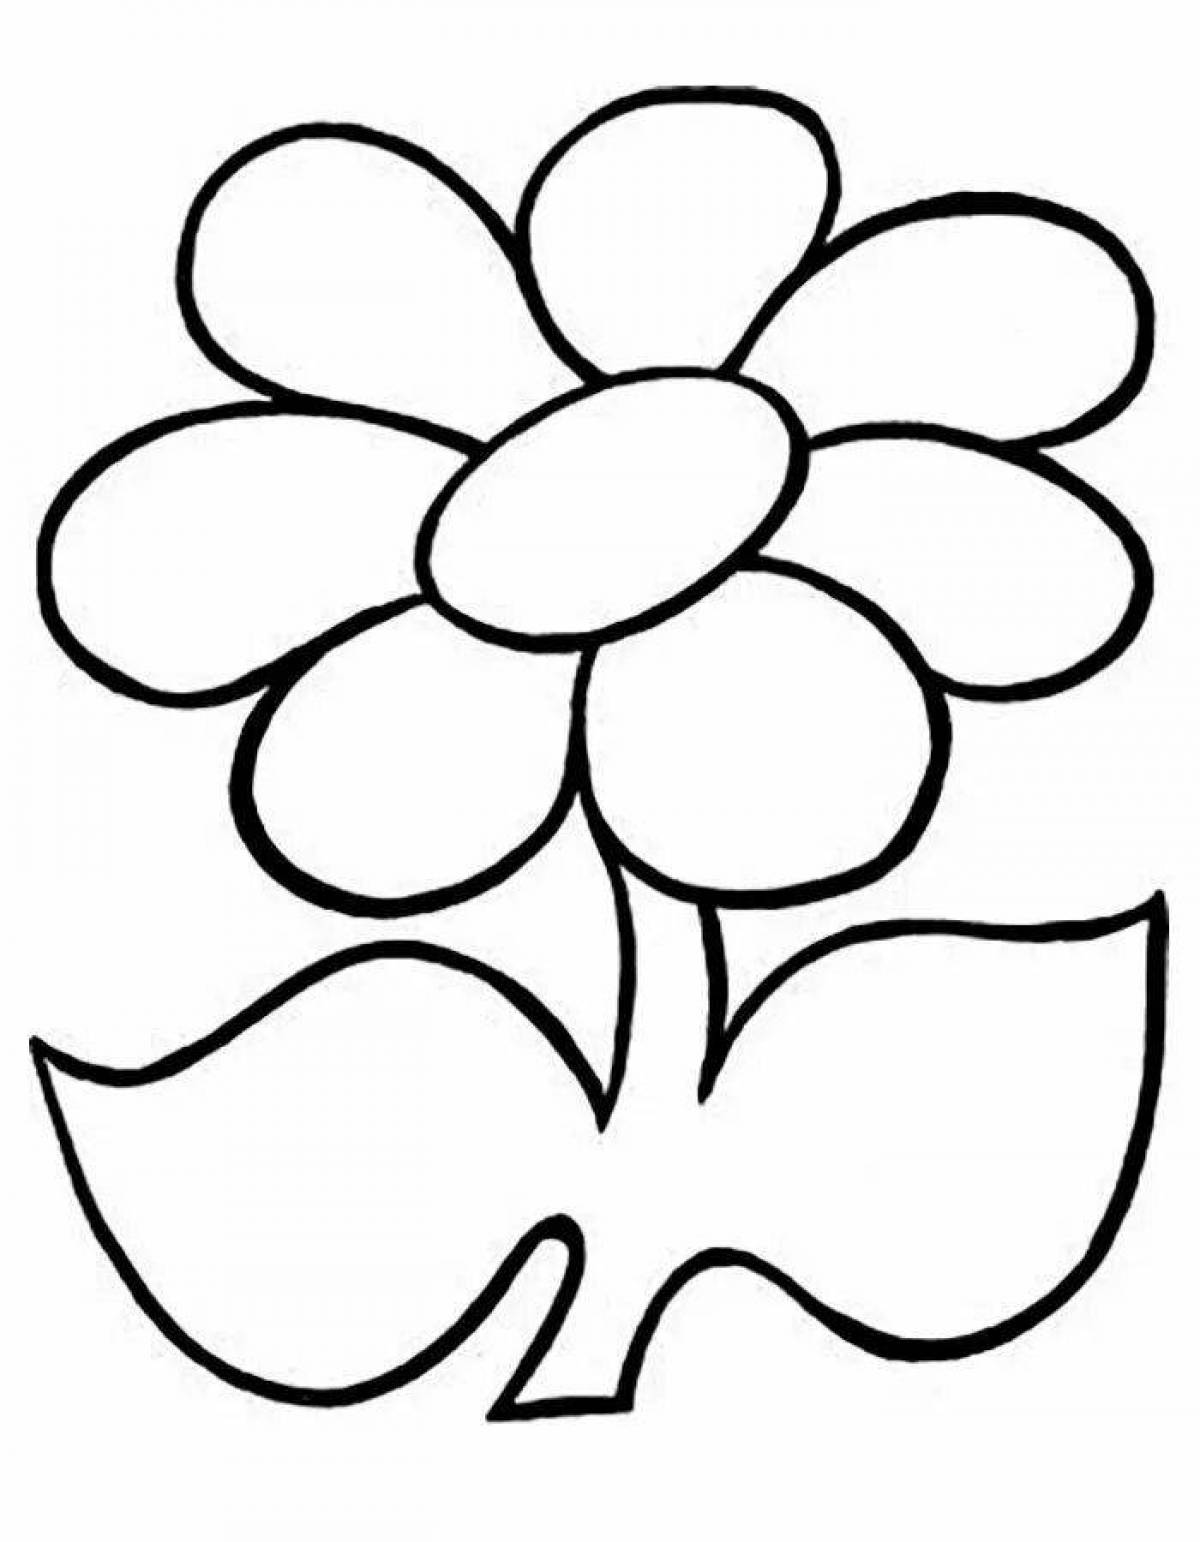 Great flowers coloring book for 3-4 year olds